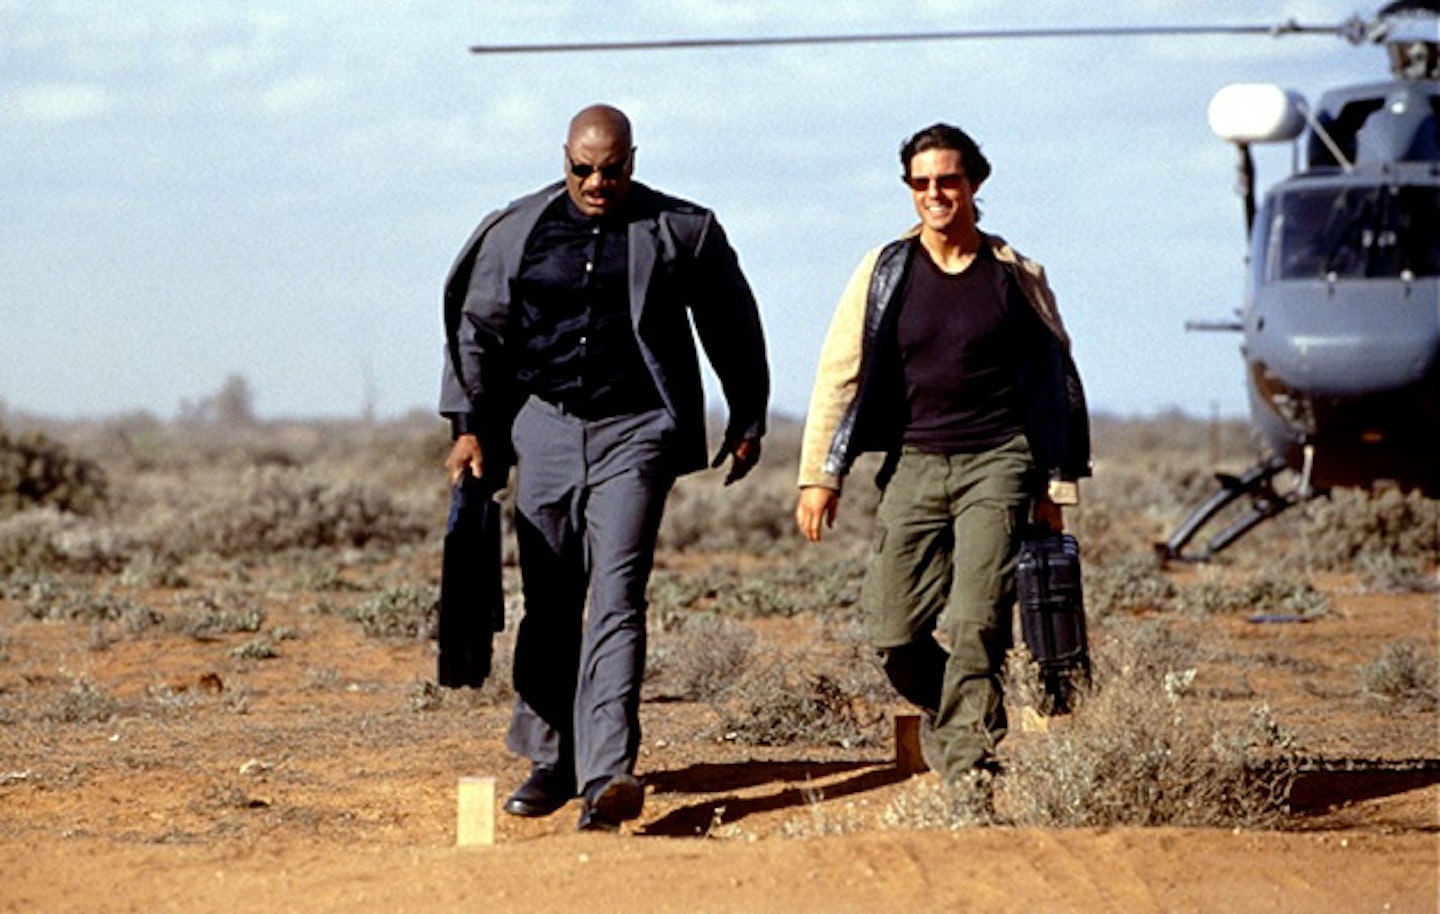 Ving Rhames and Tom Cruise in Mission: Impossible II